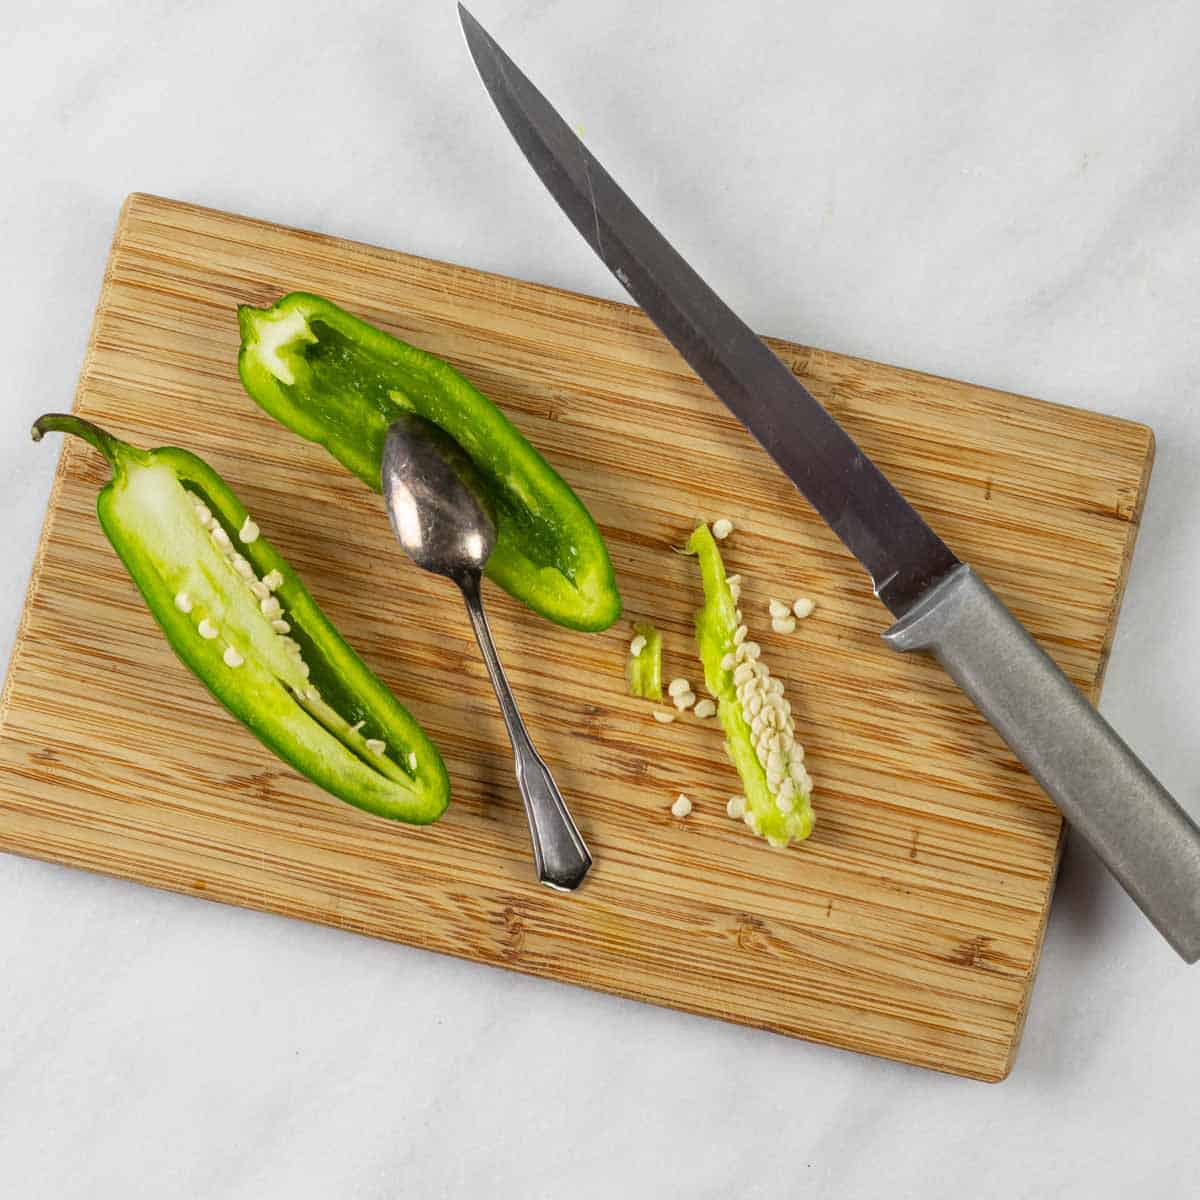 Jalapeño cut in half on a small board with a knife, spoon, and seeds partly removed.